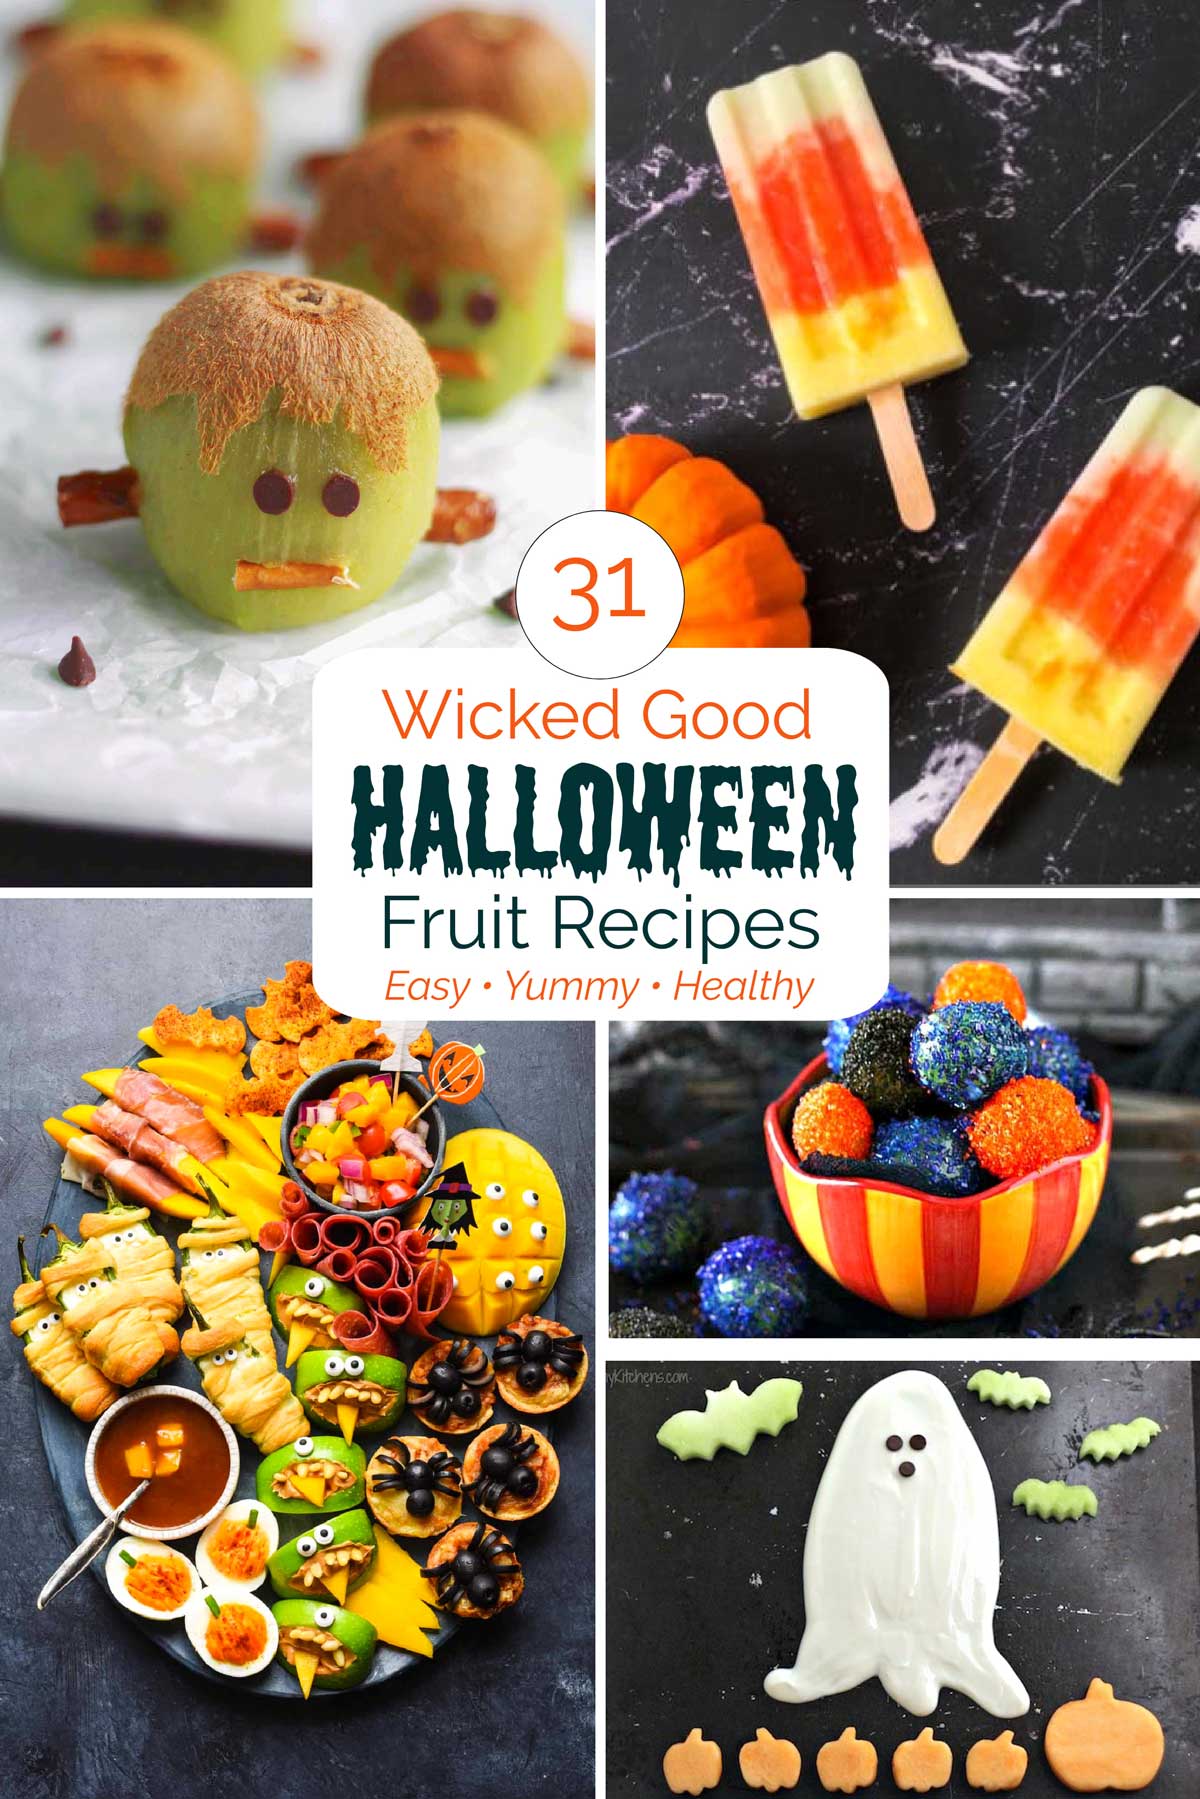 Collage featuring 5 of the recipes with text overlay "31 Wicked Good Halloween Fruit Recipes Easy Yummy Healthy".